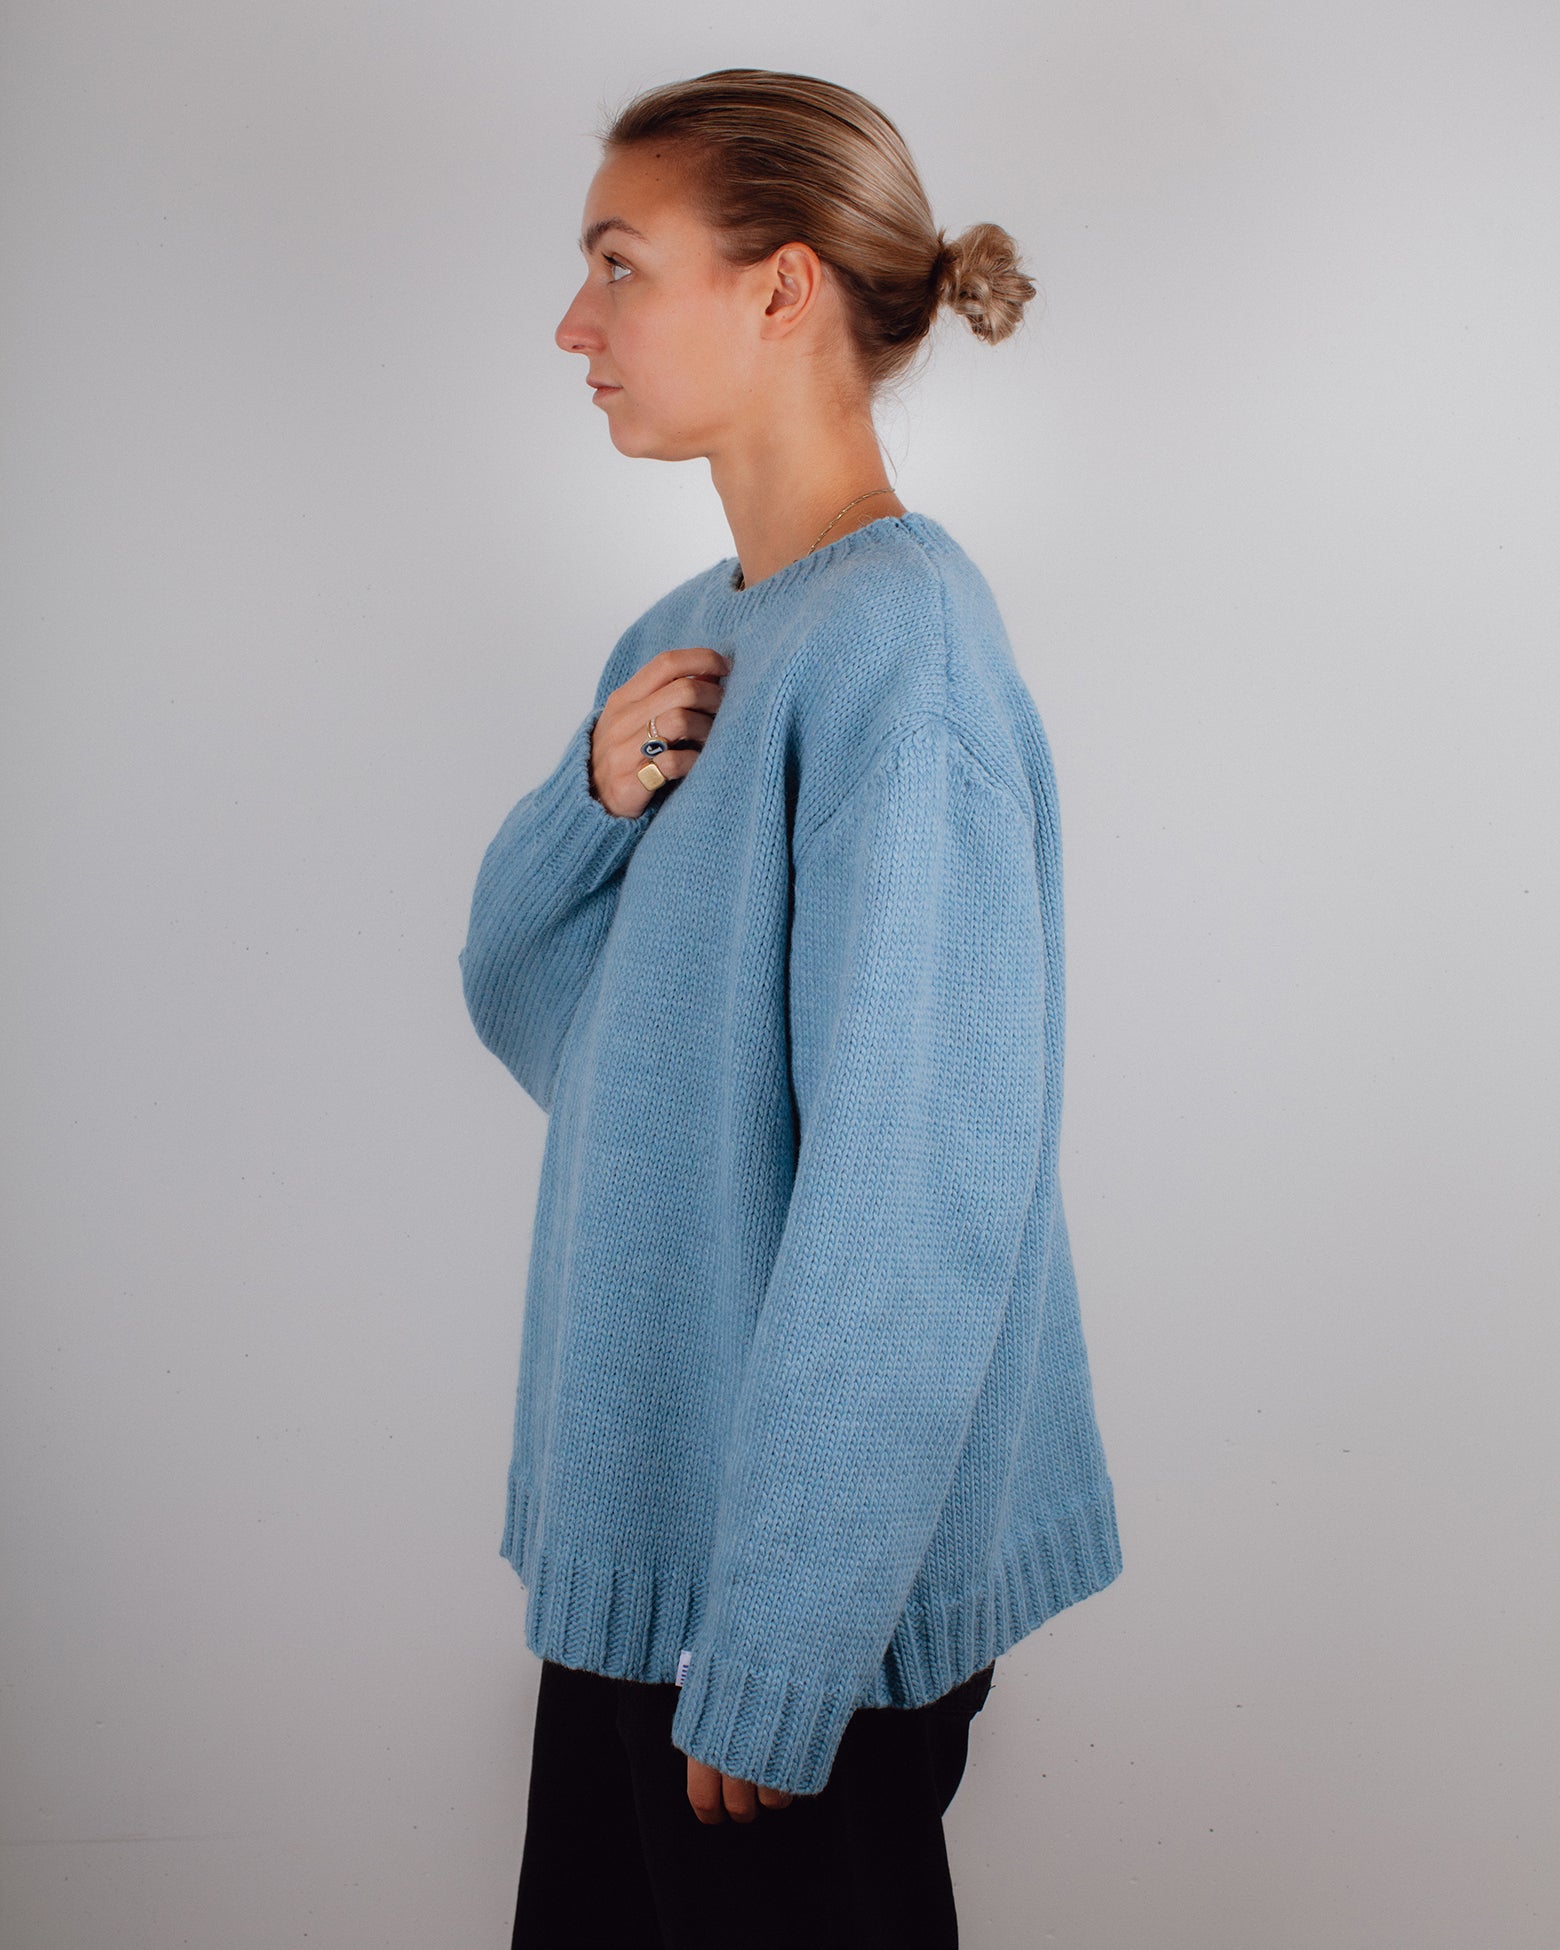 The Sweater Ice Blue